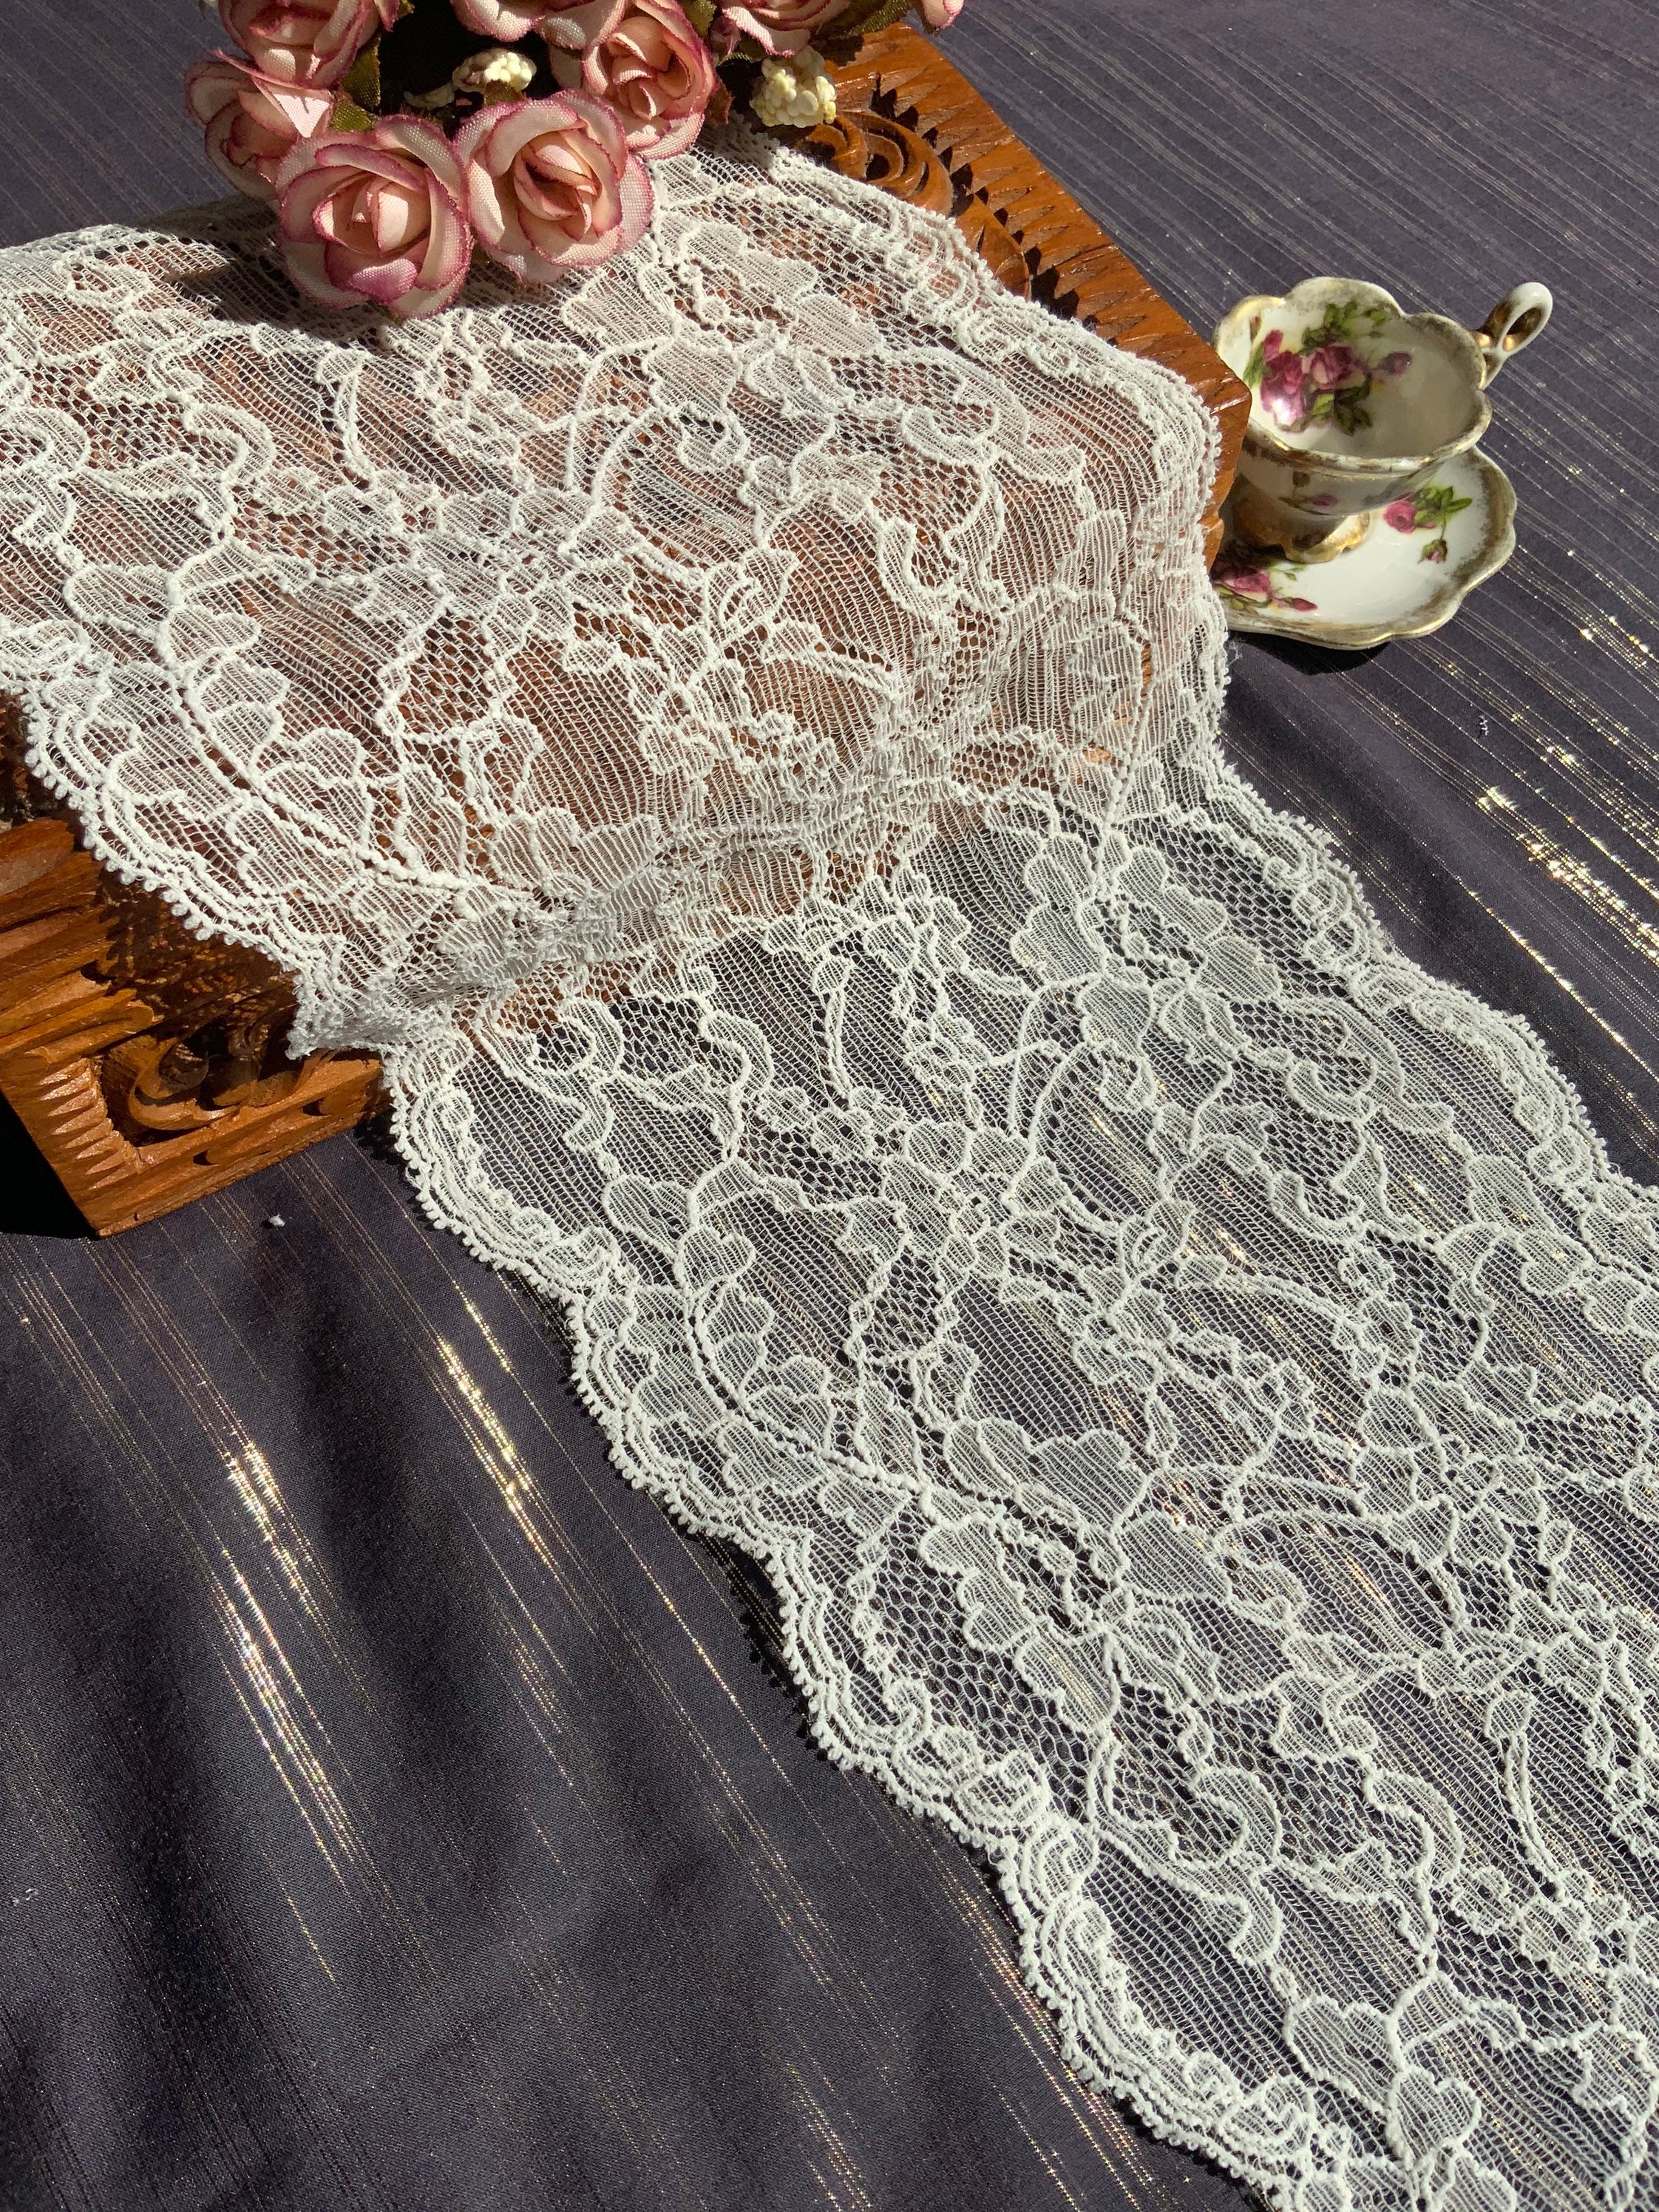 Buy 6-1/2 SUPER SOFT STRETCH Embroidered Galloon Lace